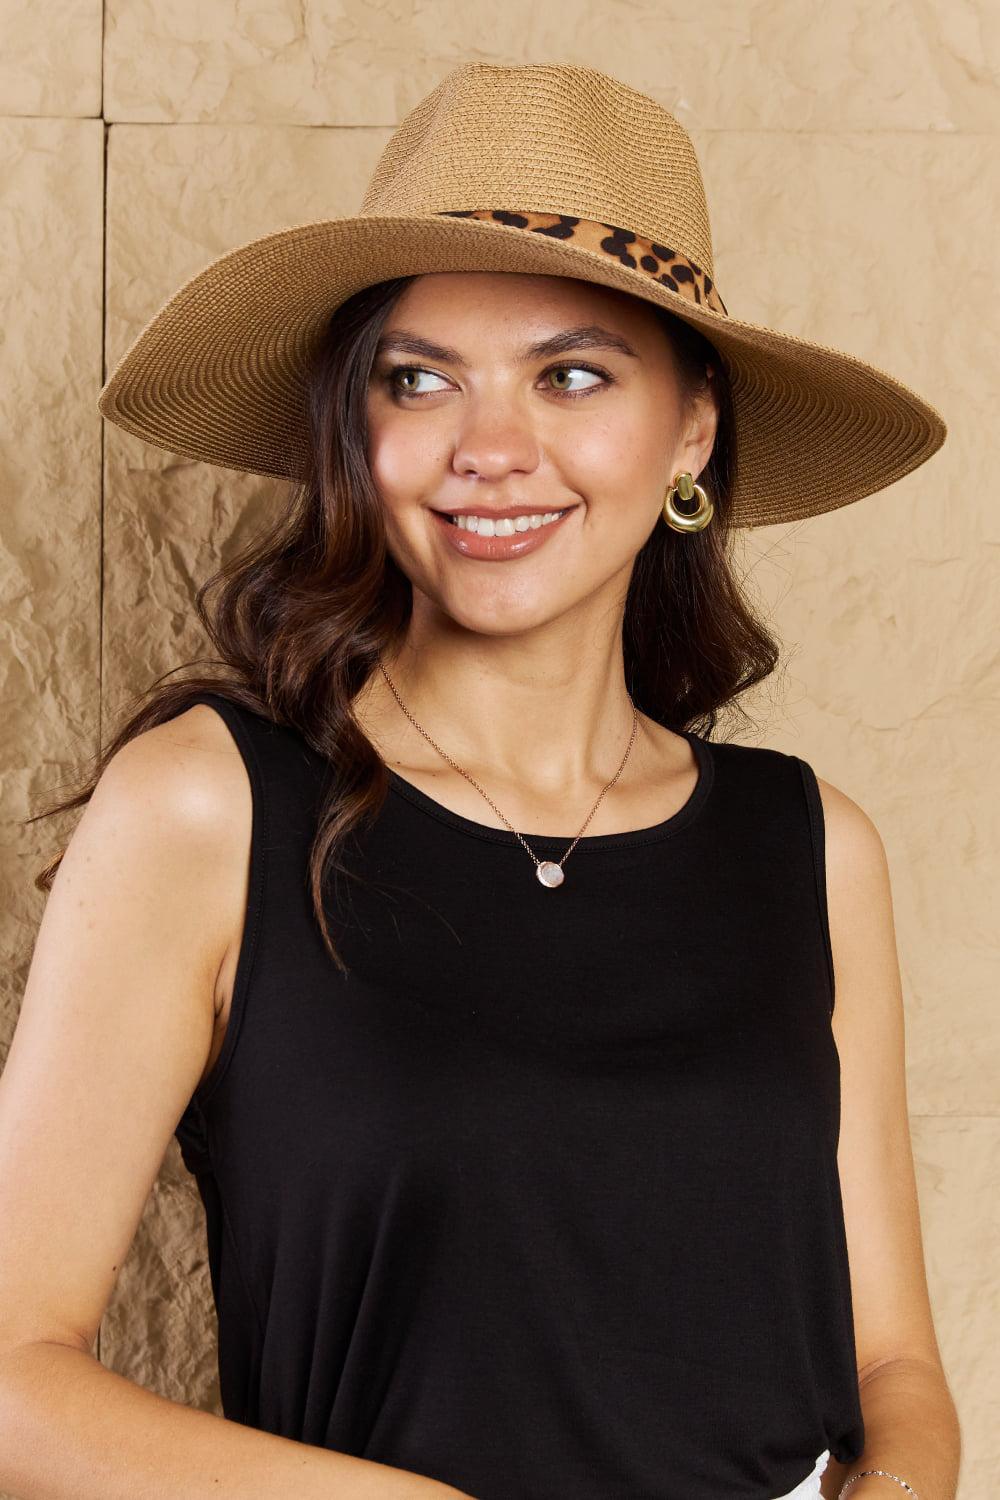 a woman wearing a black top and a brown hat